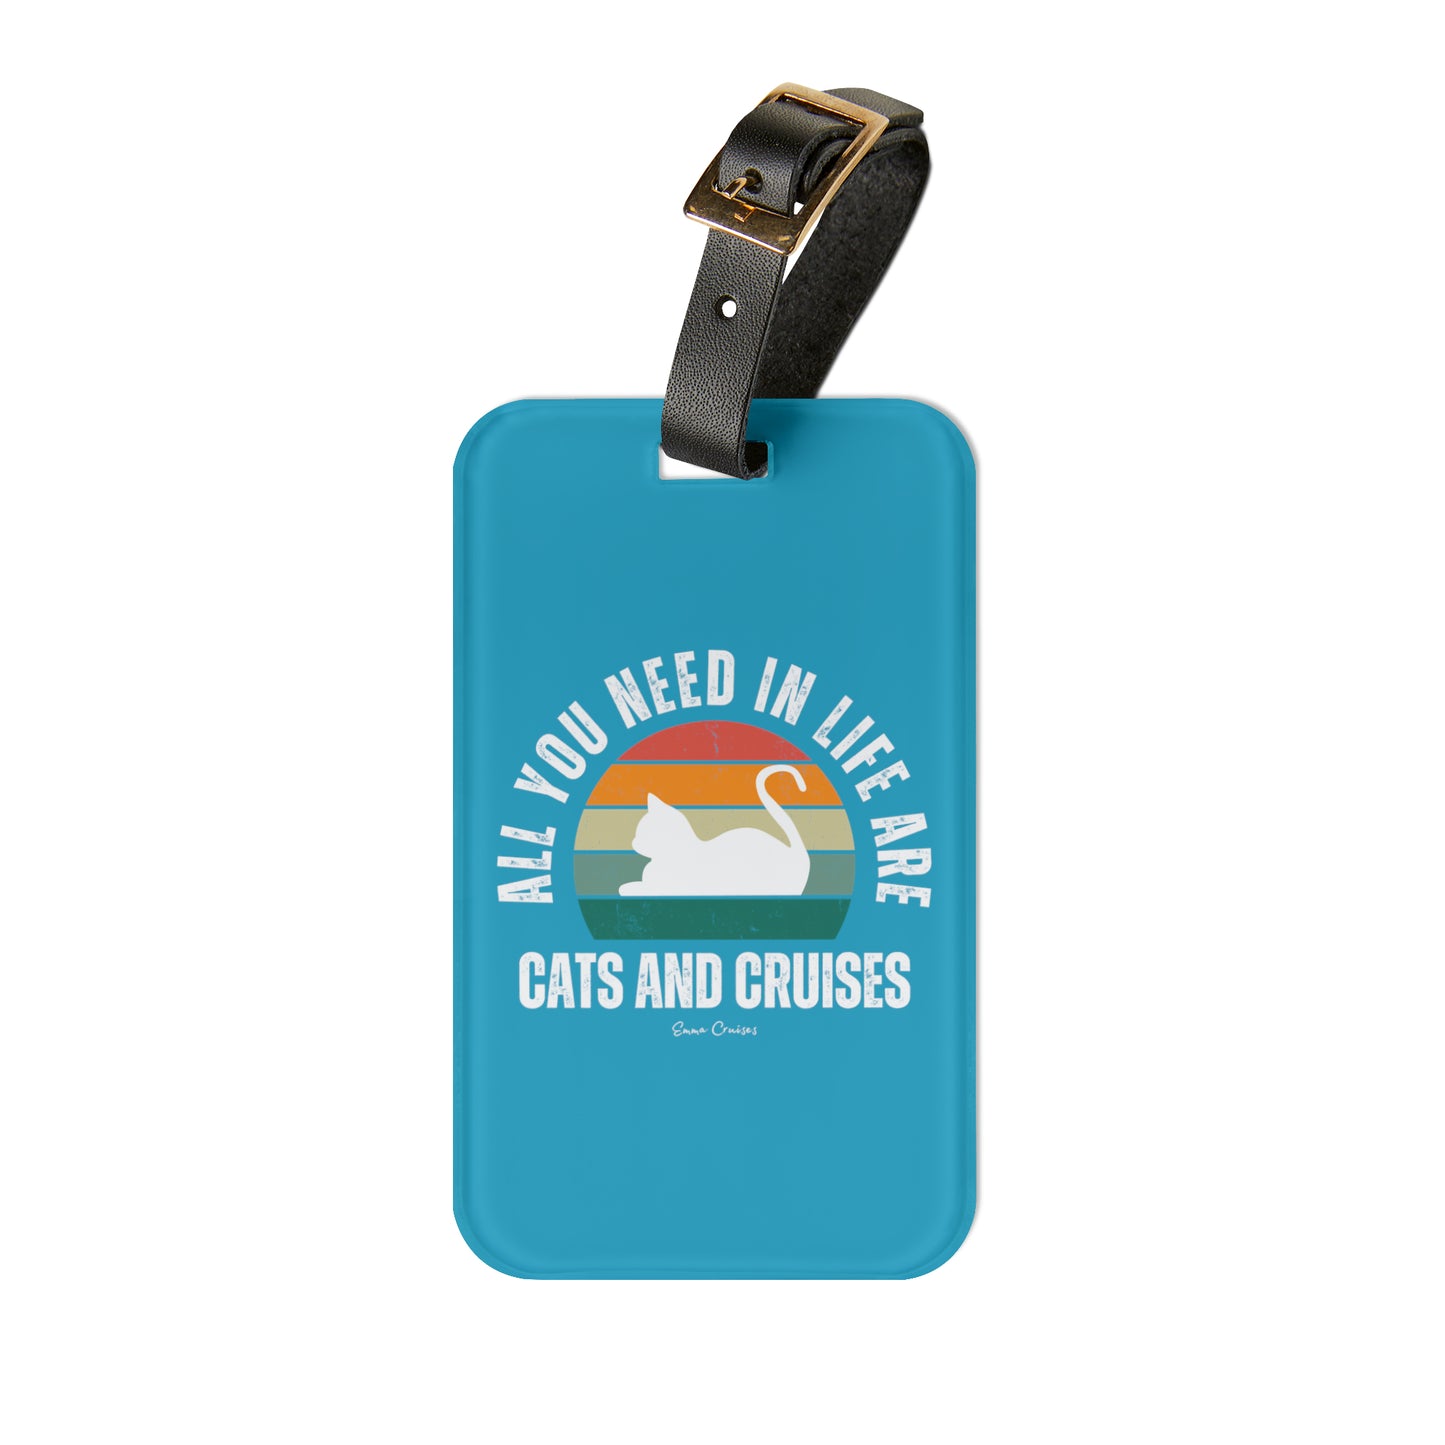 Cats and Cruises - Luggage Tag